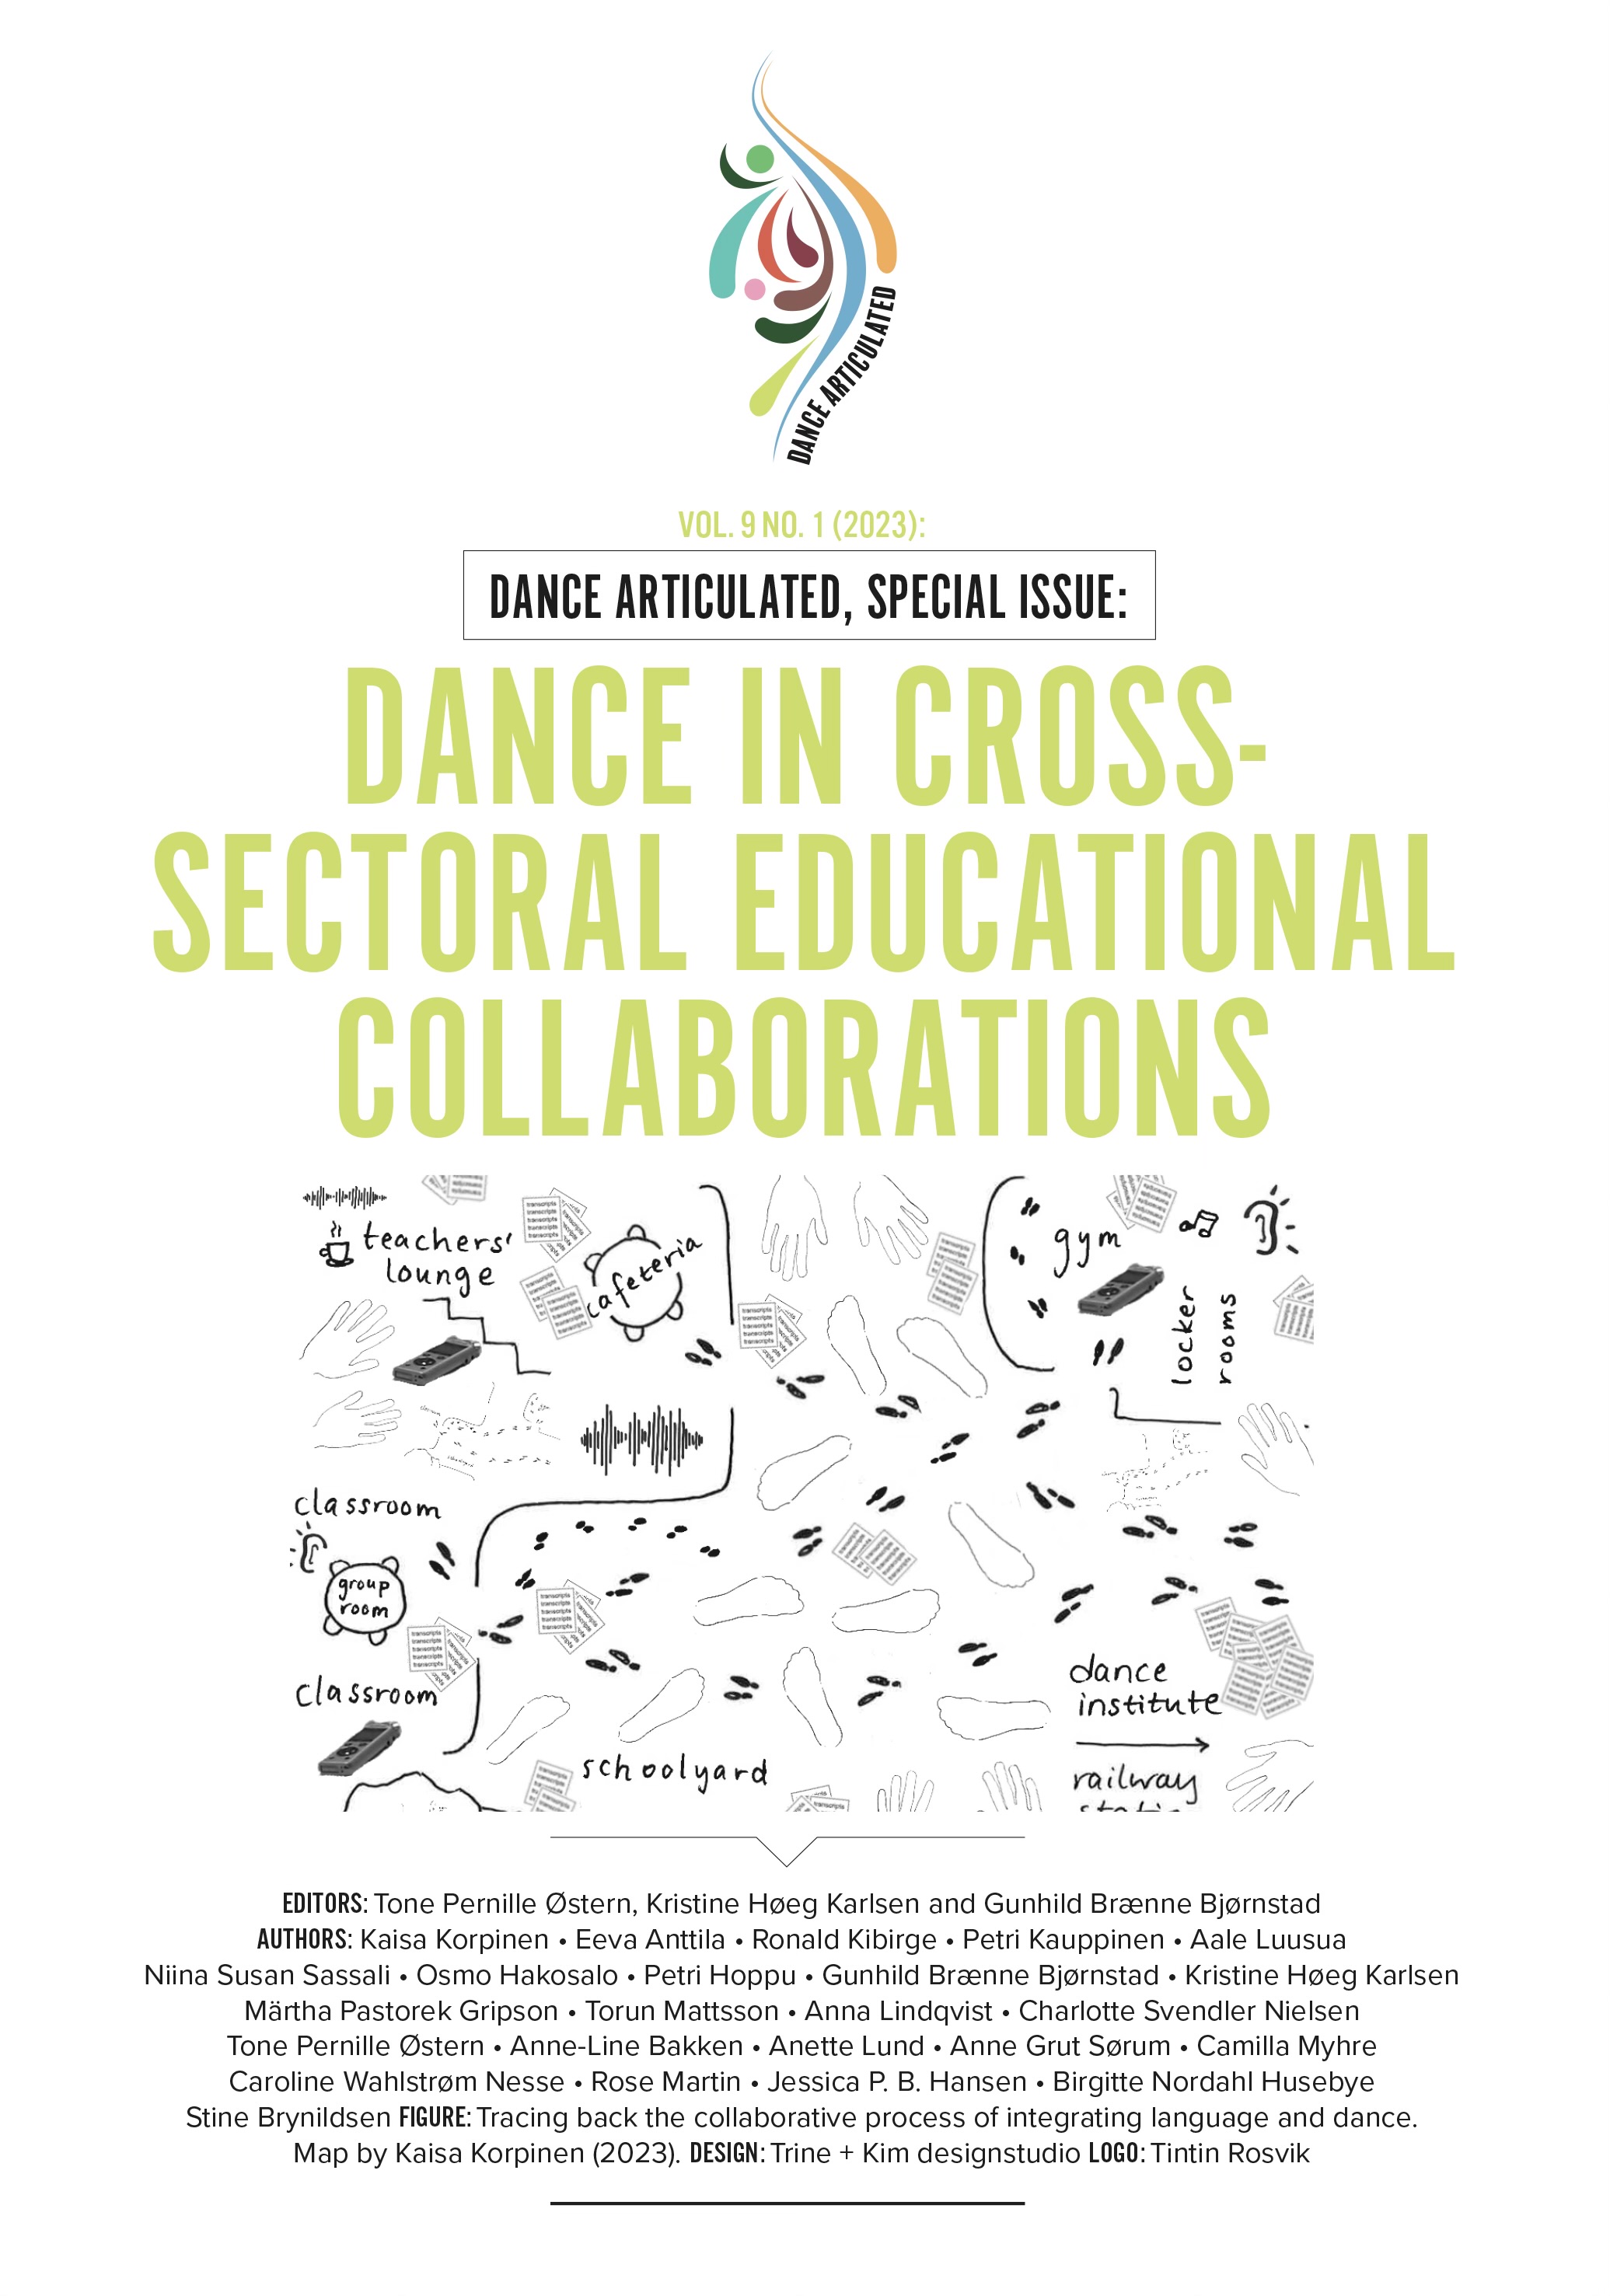 					Se Vol 9 Nr 1 (2023): Dance in cross-sectoral educational collaborations
				